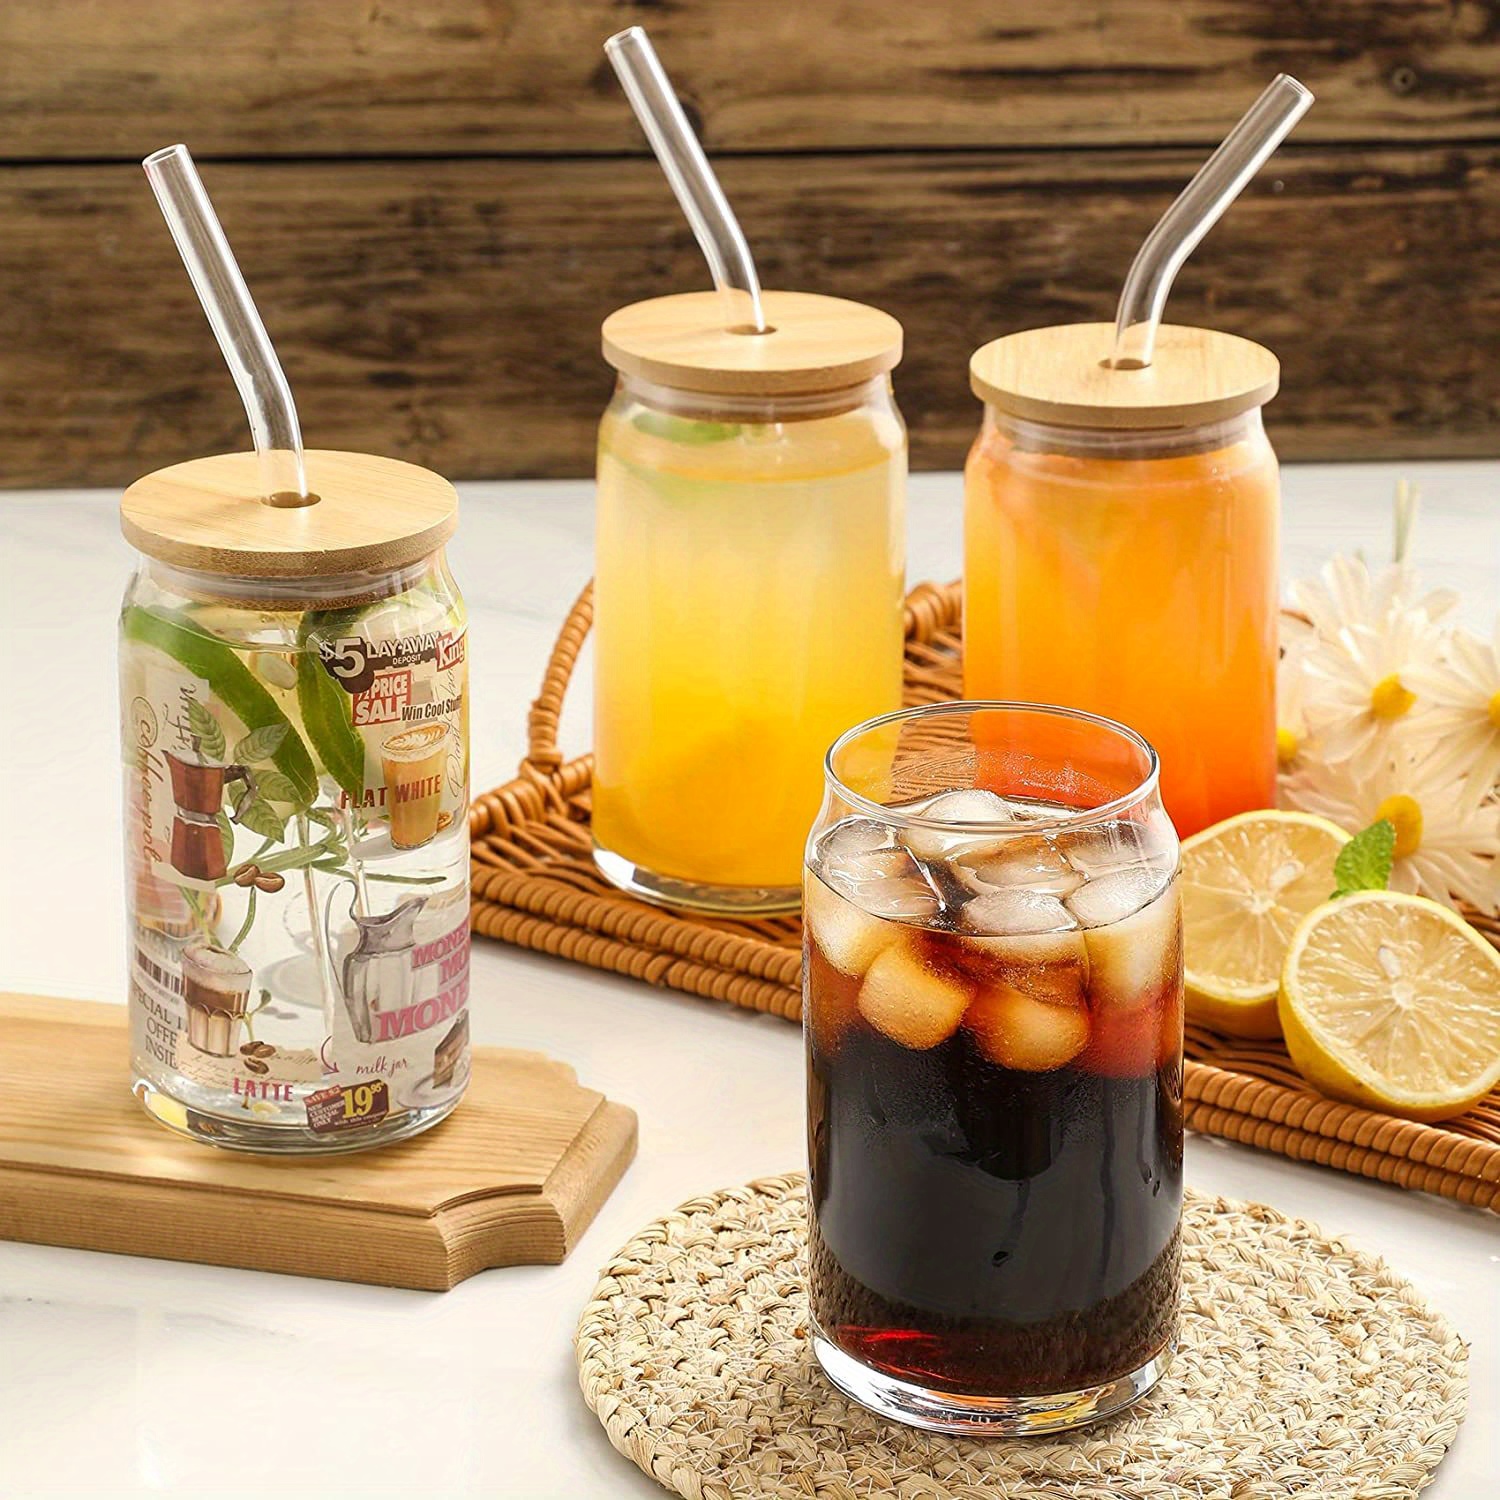 Cola Can Shaped Glass Cup Transparent Glass Tea Coffee Mug Ice Beer Cup  Juice Milk Drinking Cup Mug Bar Cocktail Cup 400ml/550ml